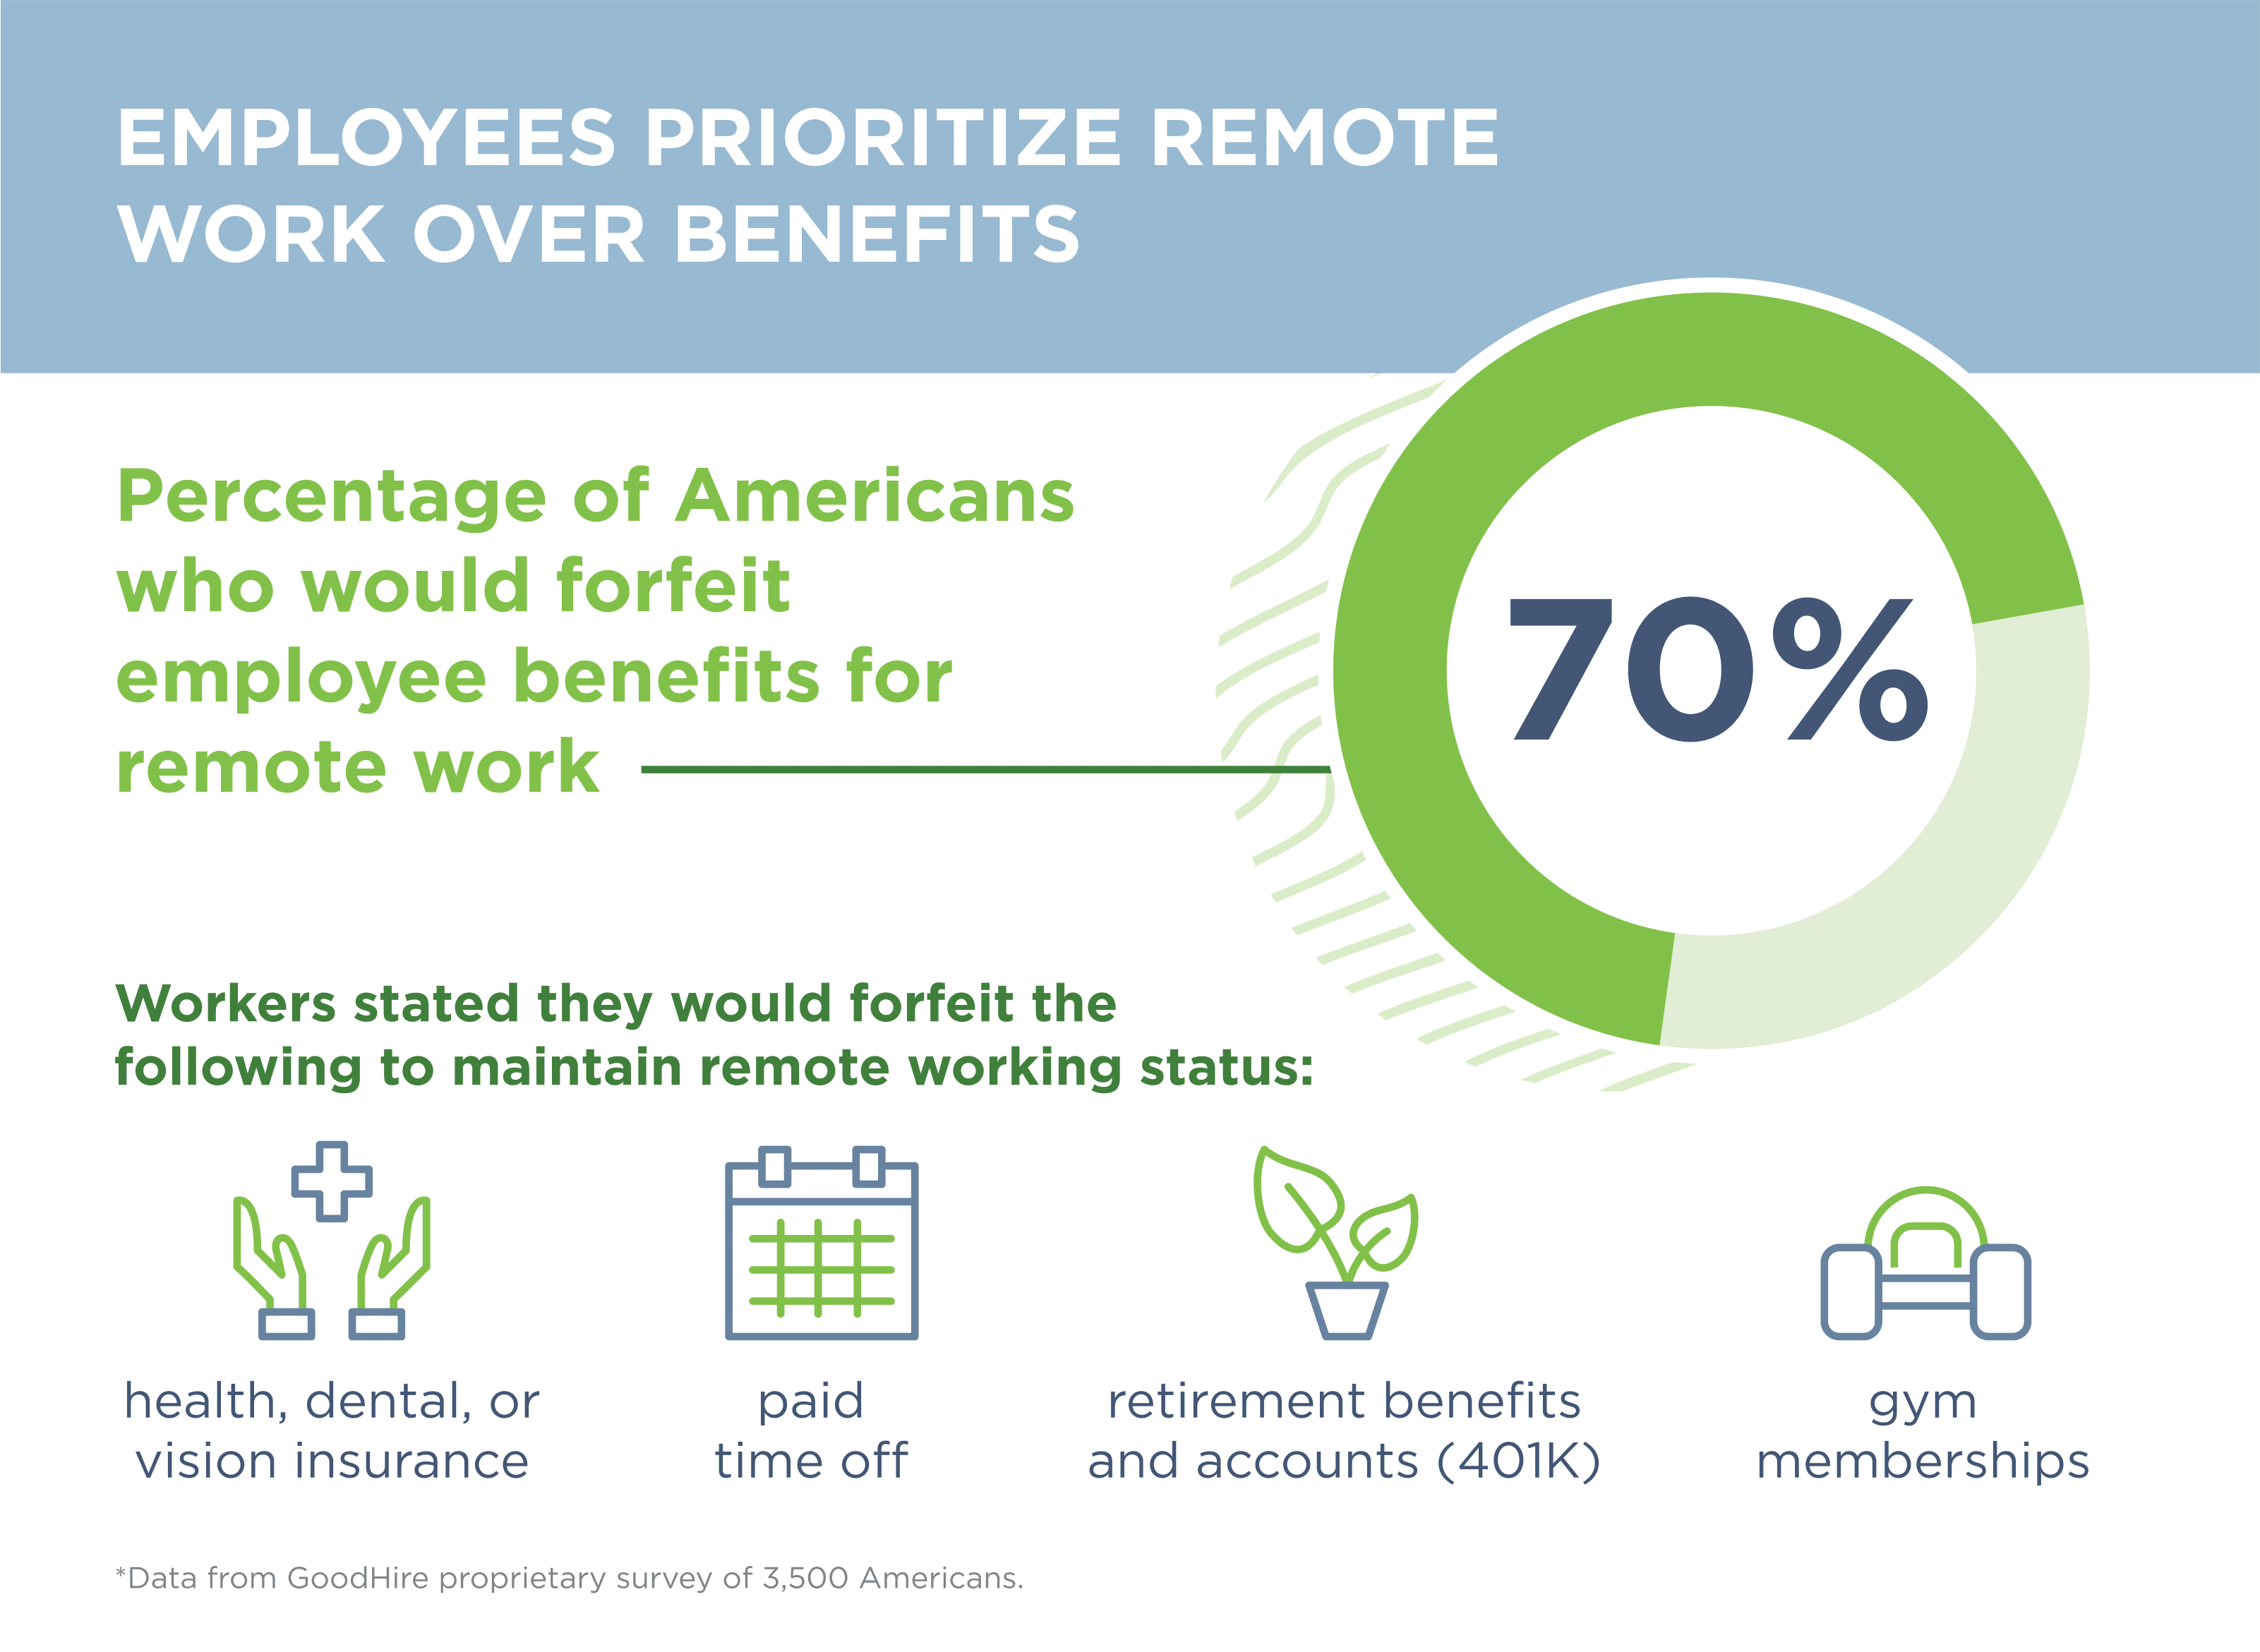 Graph shows 70% of Americans would forfeit employee benefits for remote work.